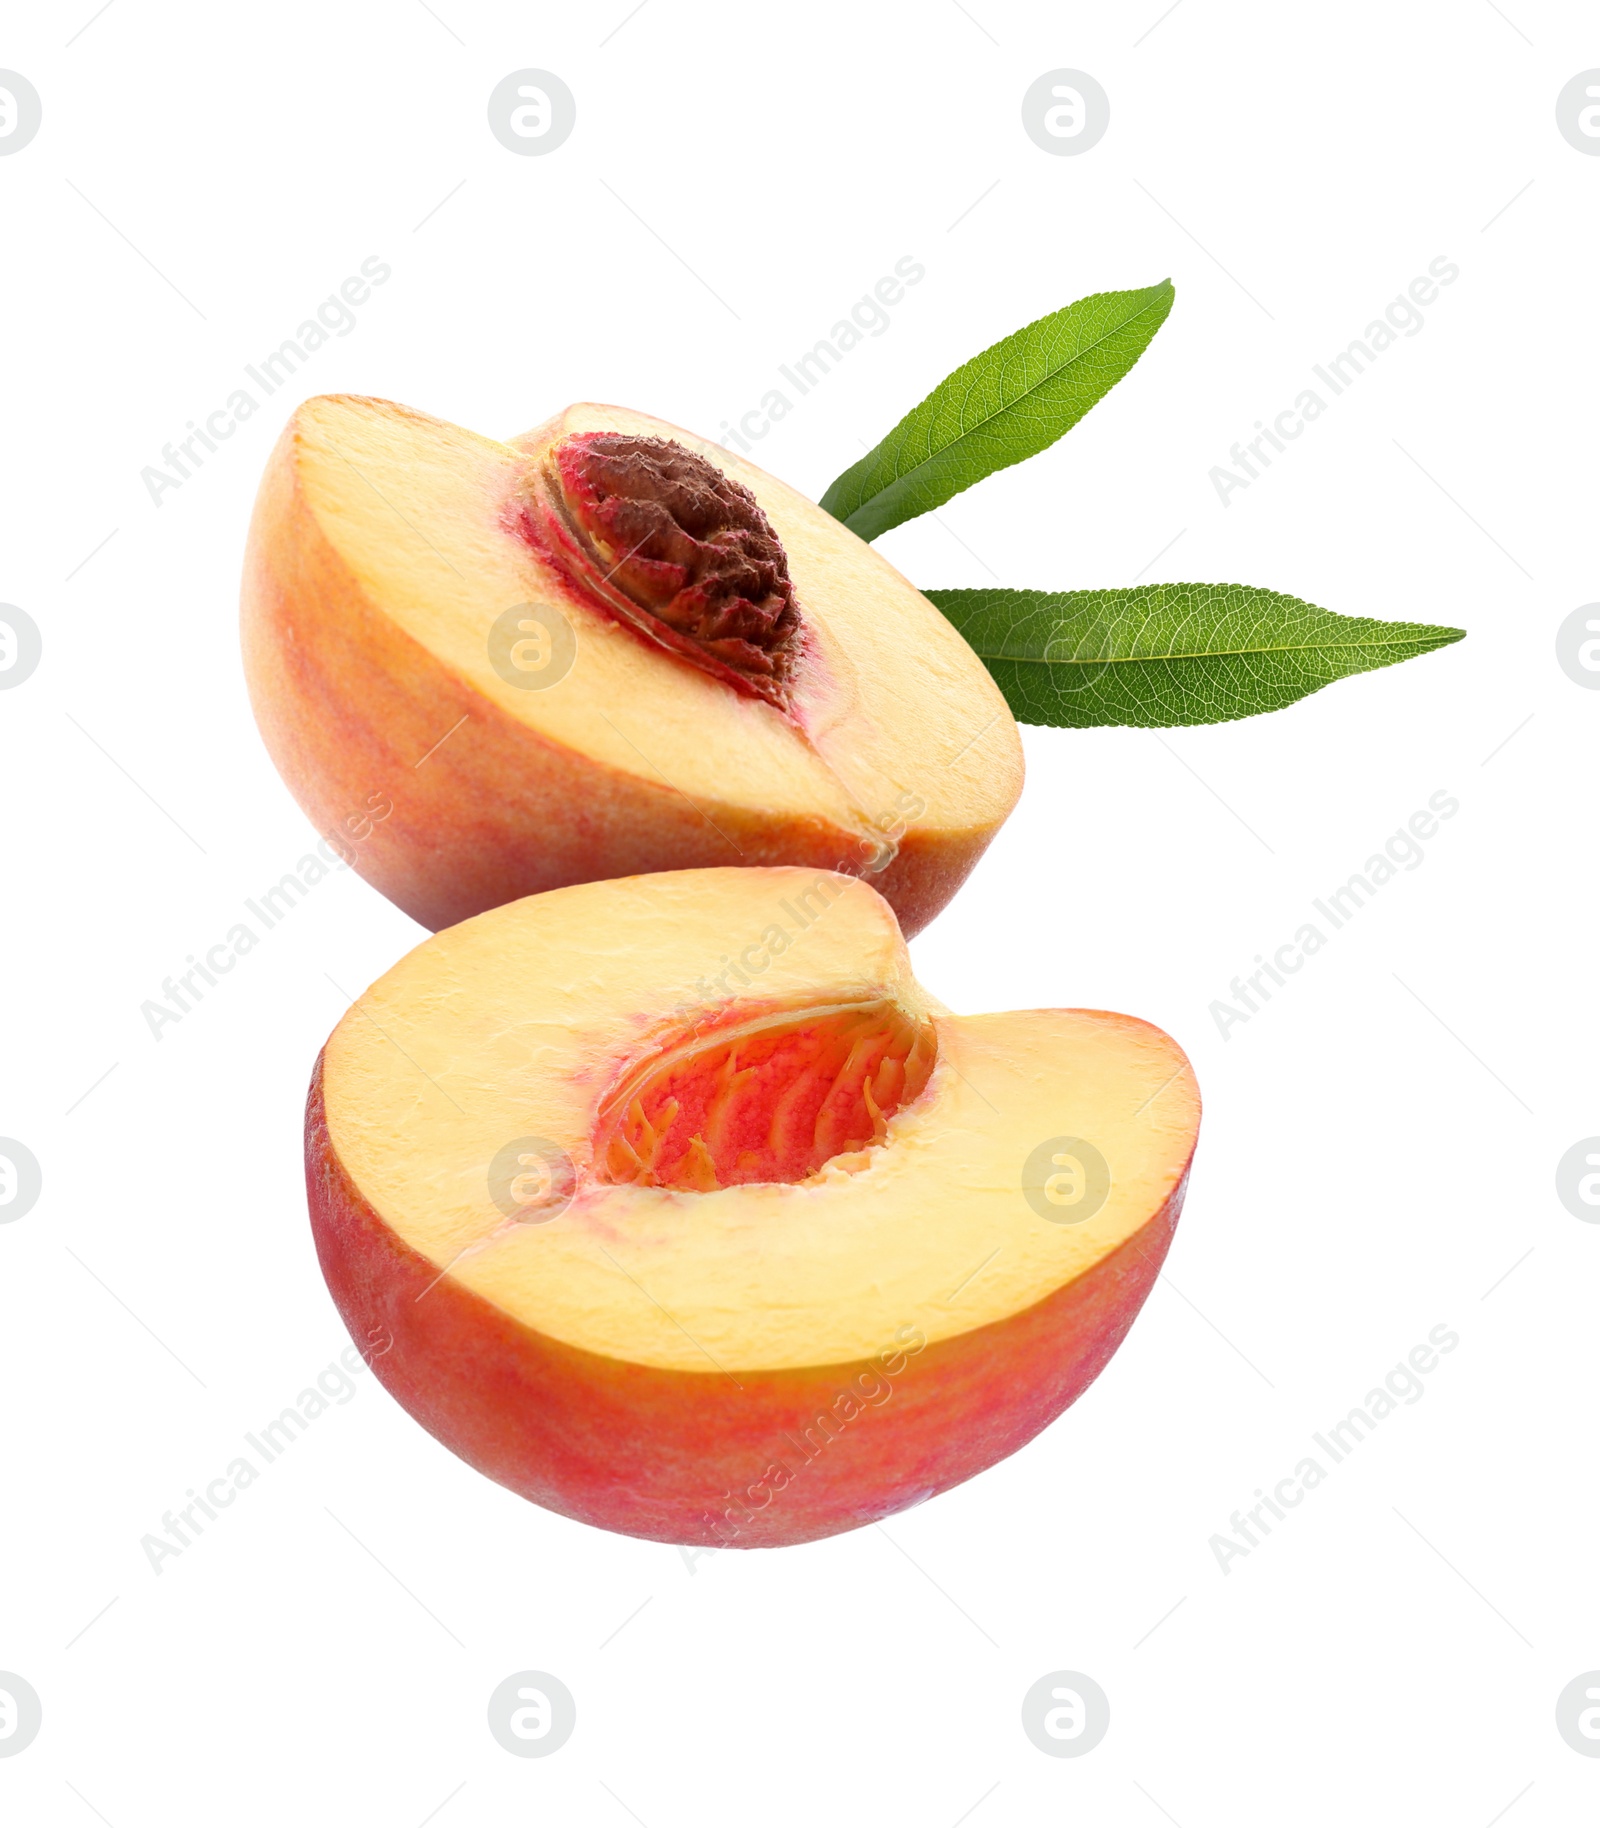 Image of Juicy fresh halved peach with green leaves falling on white background